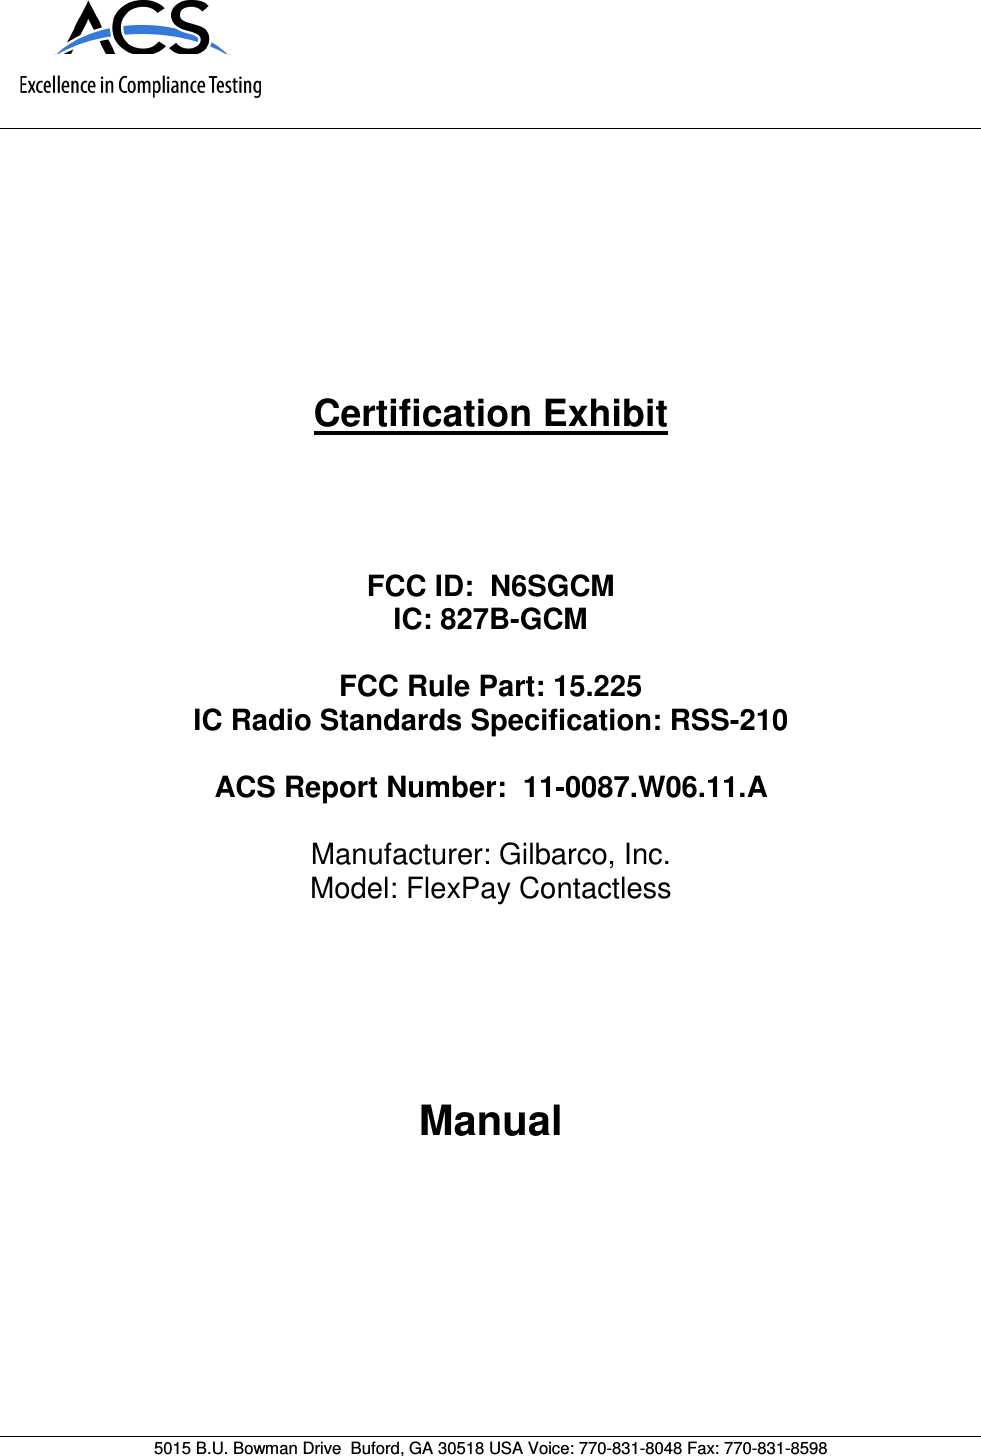      5015 B.U. Bowman Drive  Buford, GA 30518 USA Voice: 770-831-8048 Fax: 770-831-8598   Certification Exhibit     FCC ID:  N6SGCM IC: 827B-GCM  FCC Rule Part: 15.225 IC Radio Standards Specification: RSS-210  ACS Report Number:  11-0087.W06.11.A   Manufacturer: Gilbarco, Inc. Model: FlexPay Contactless     Manual  